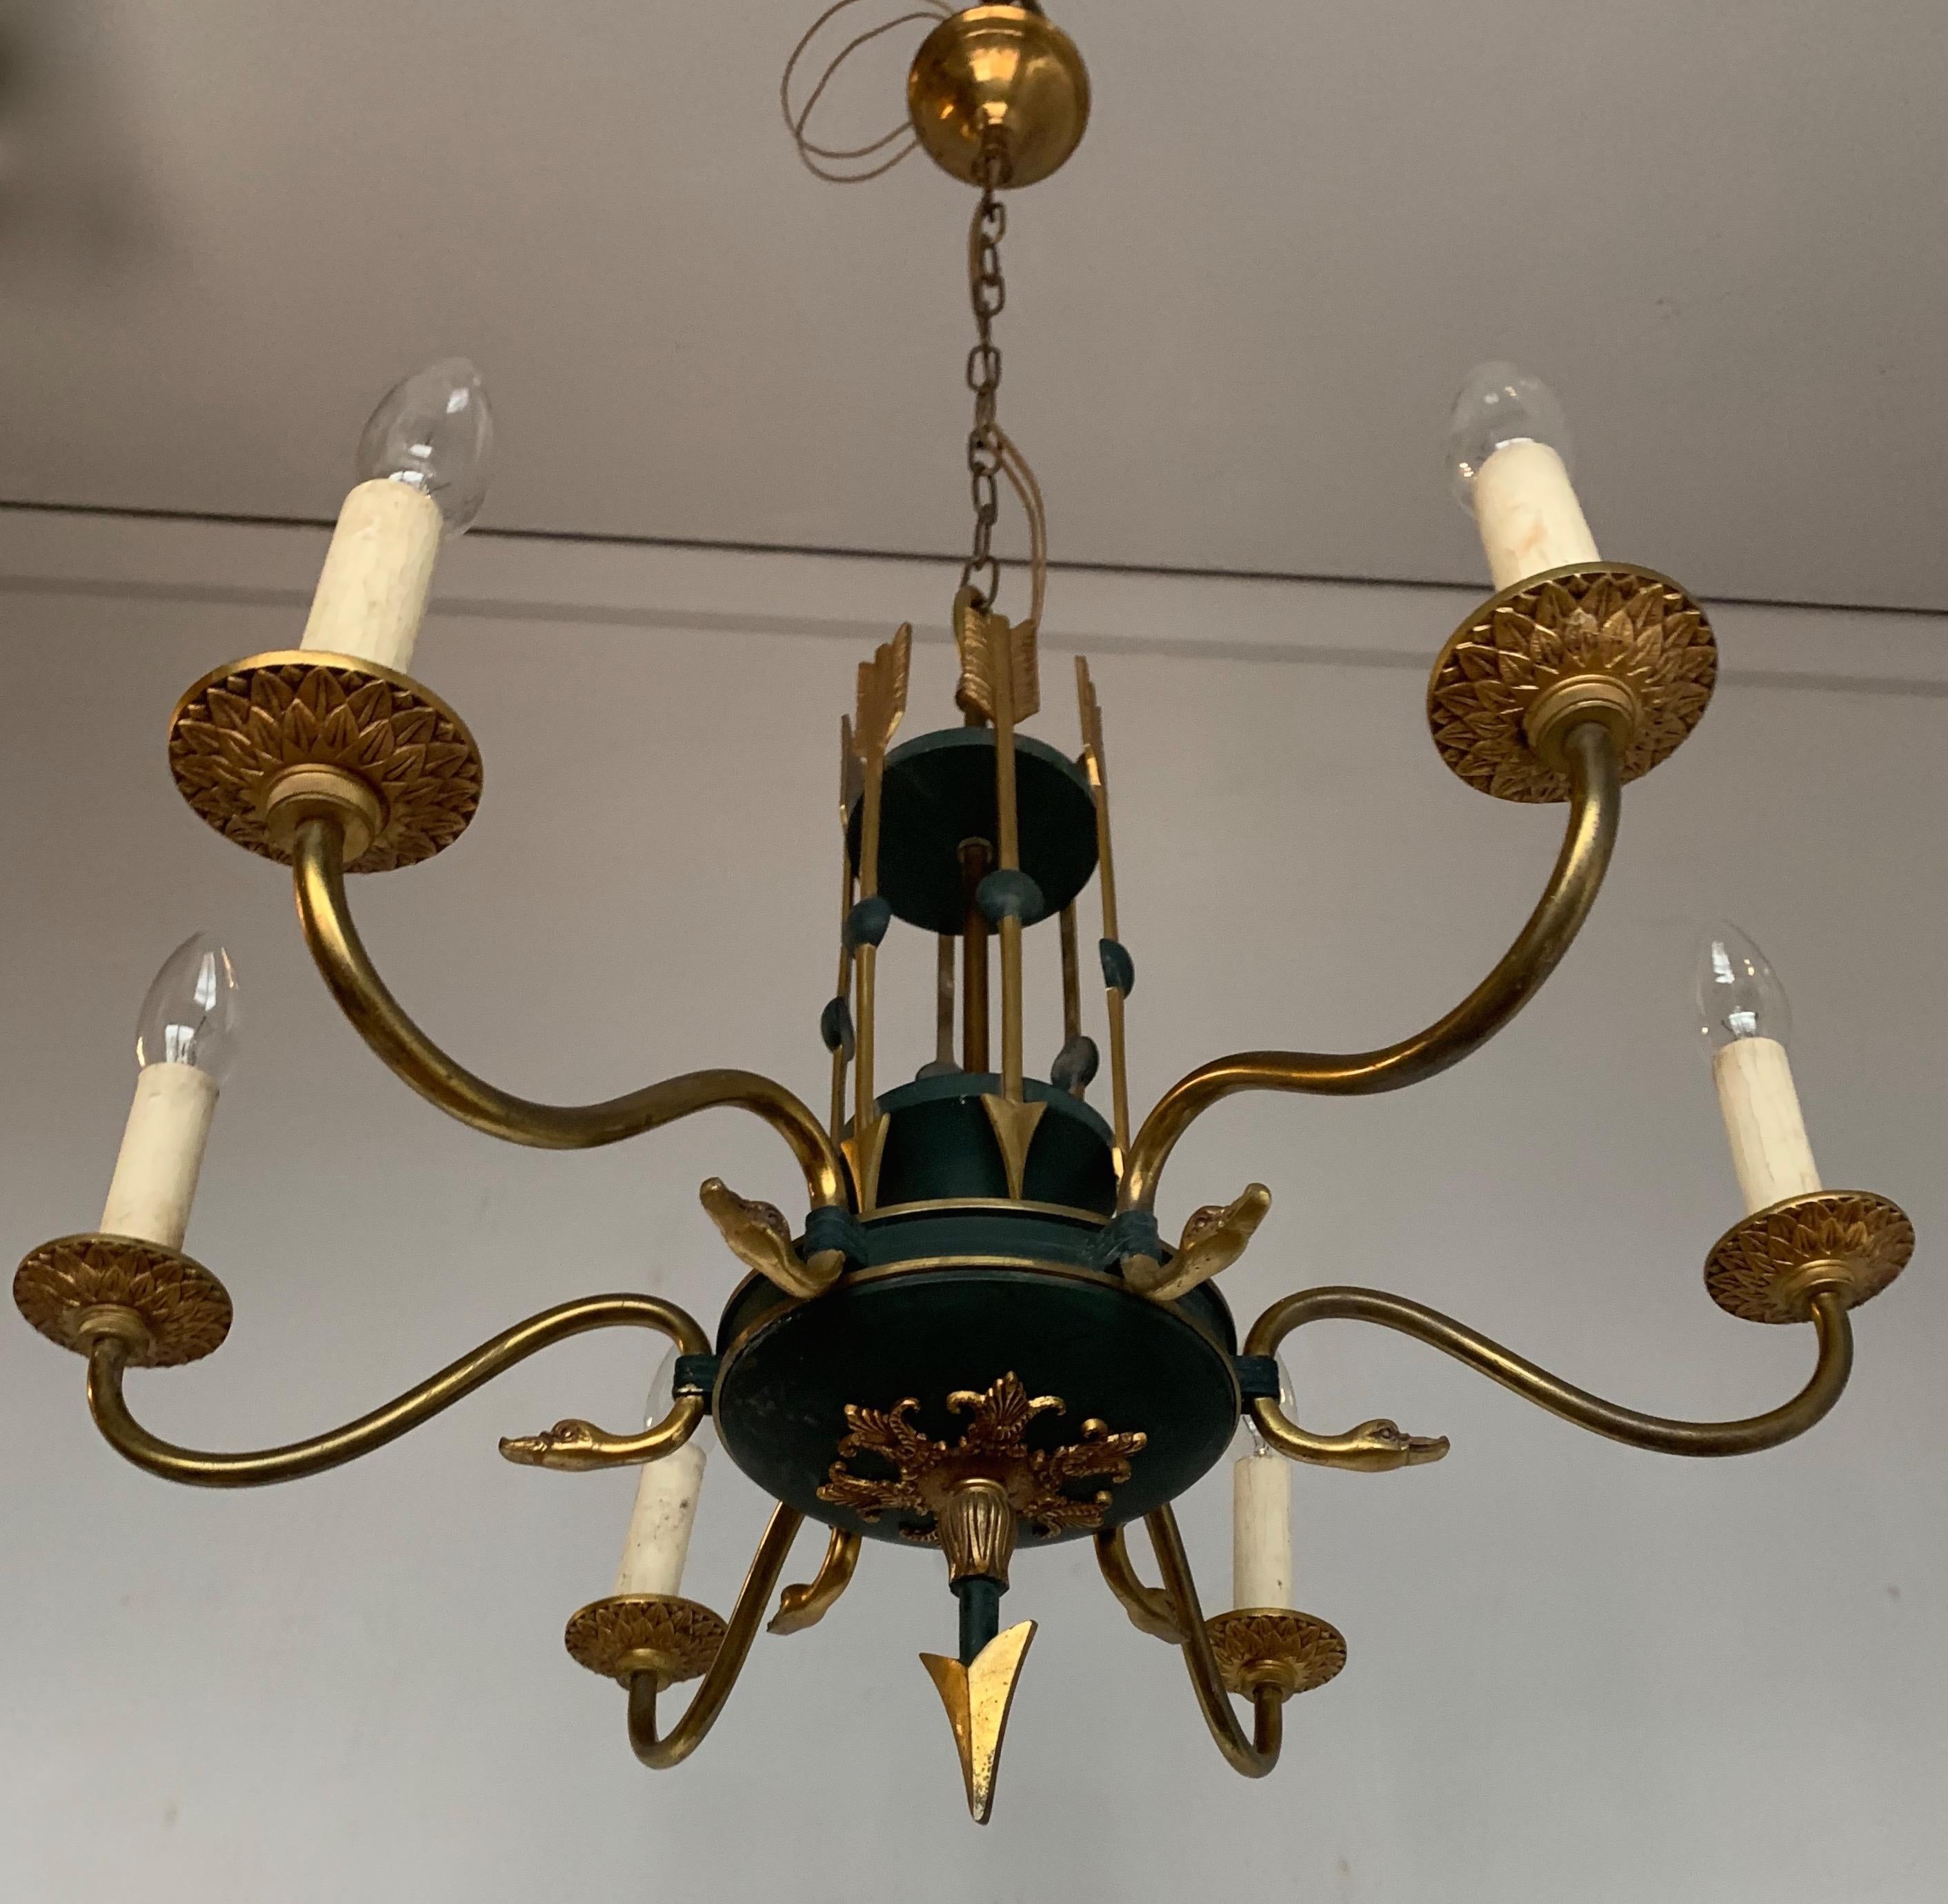 Stylish Empire Revival Six-Light Pendant Chandelier with Swan Heads and Arrows For Sale 5